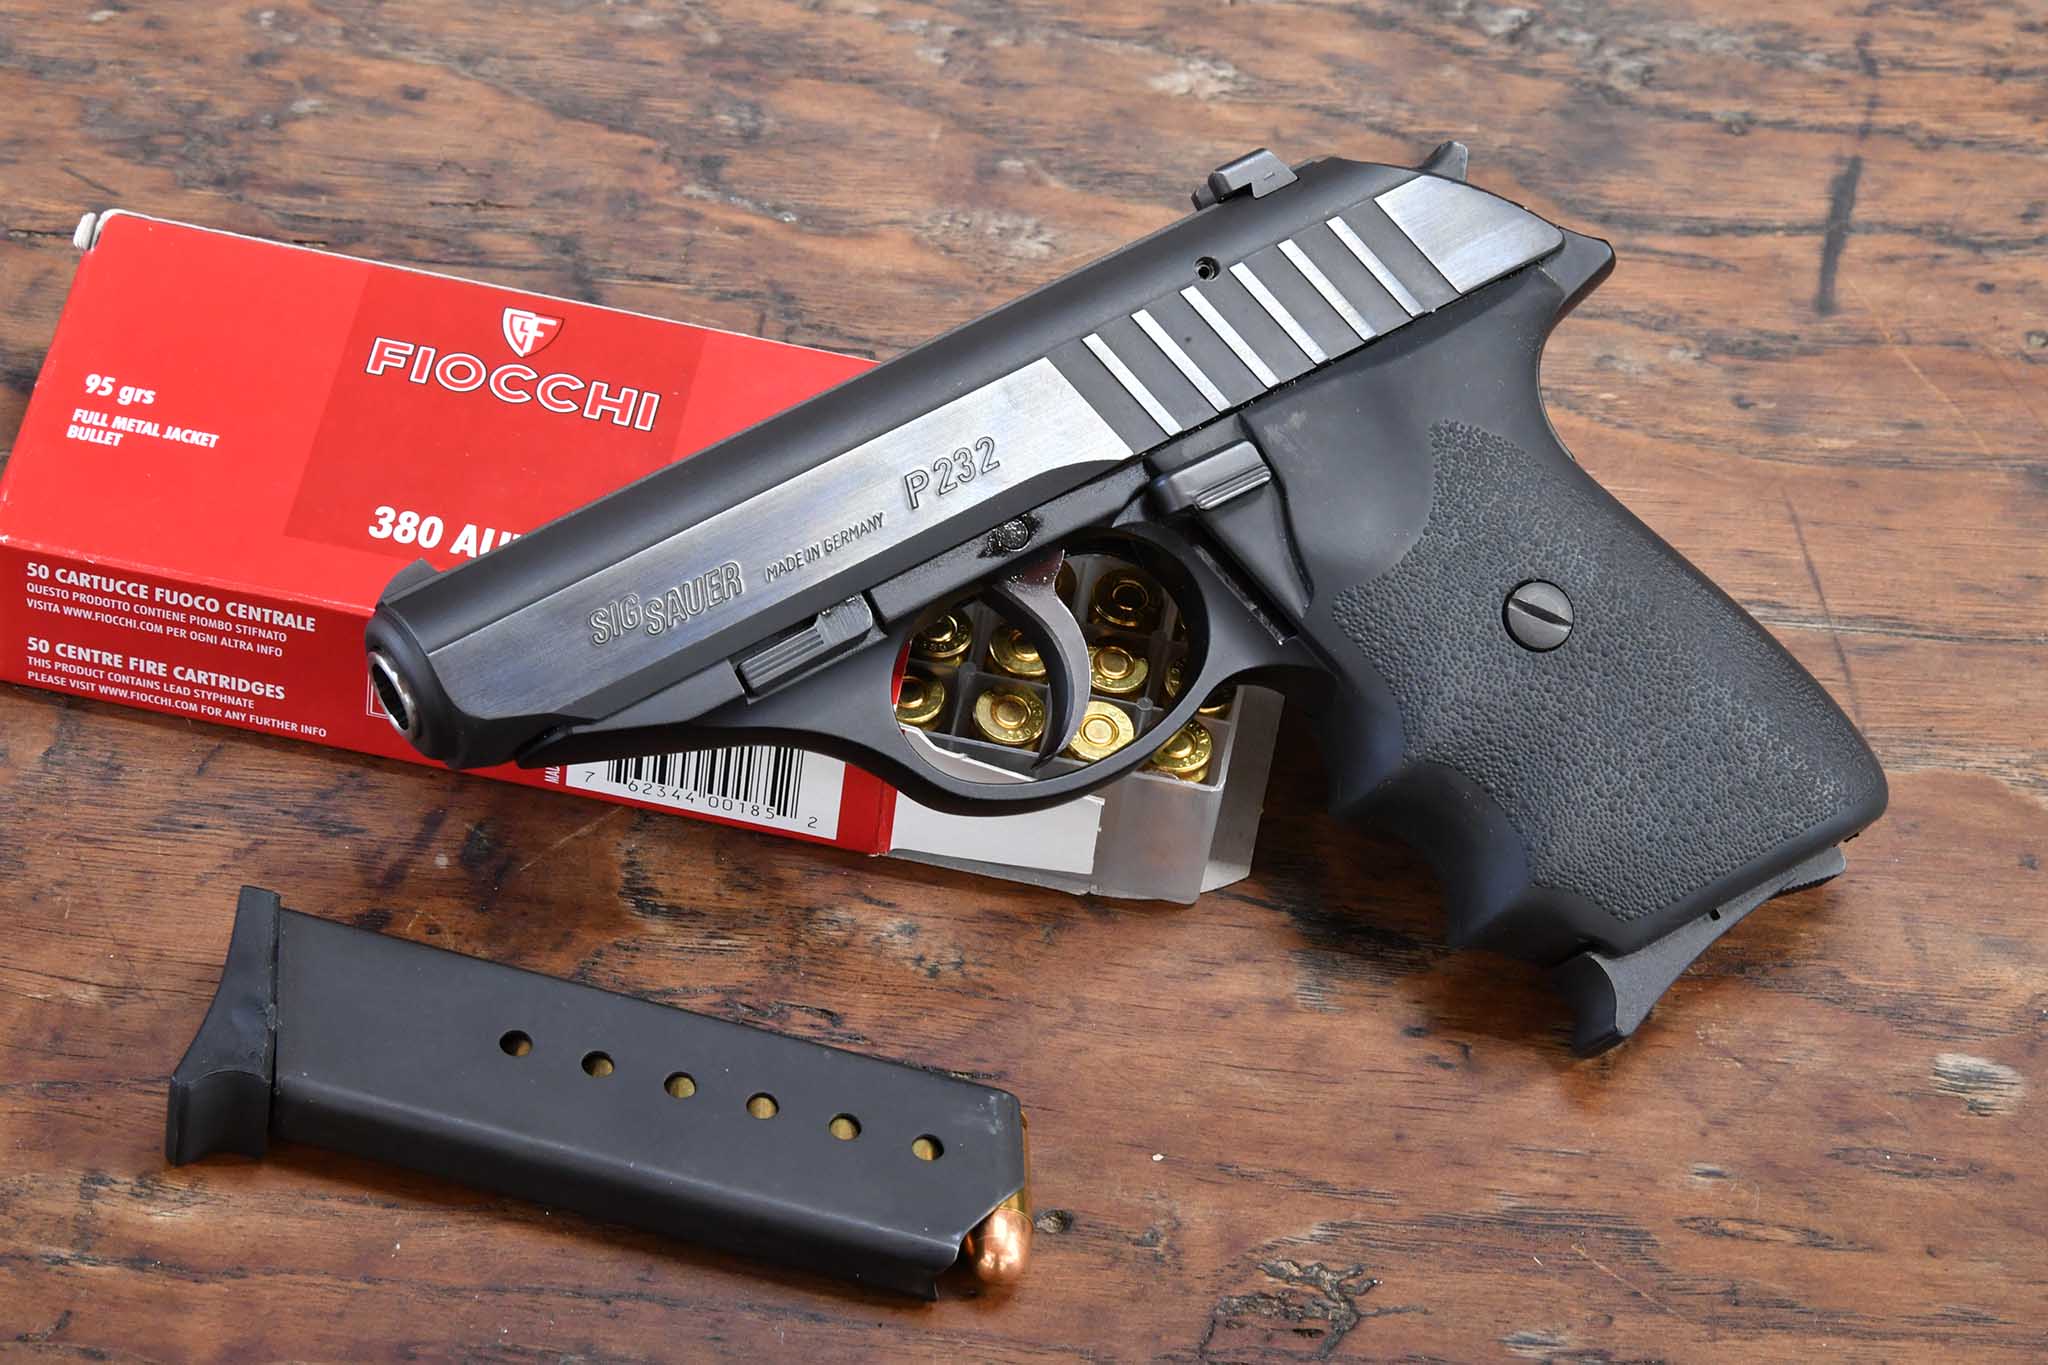 SIG Sauer P232 .380 ACP pistol | all4shooters